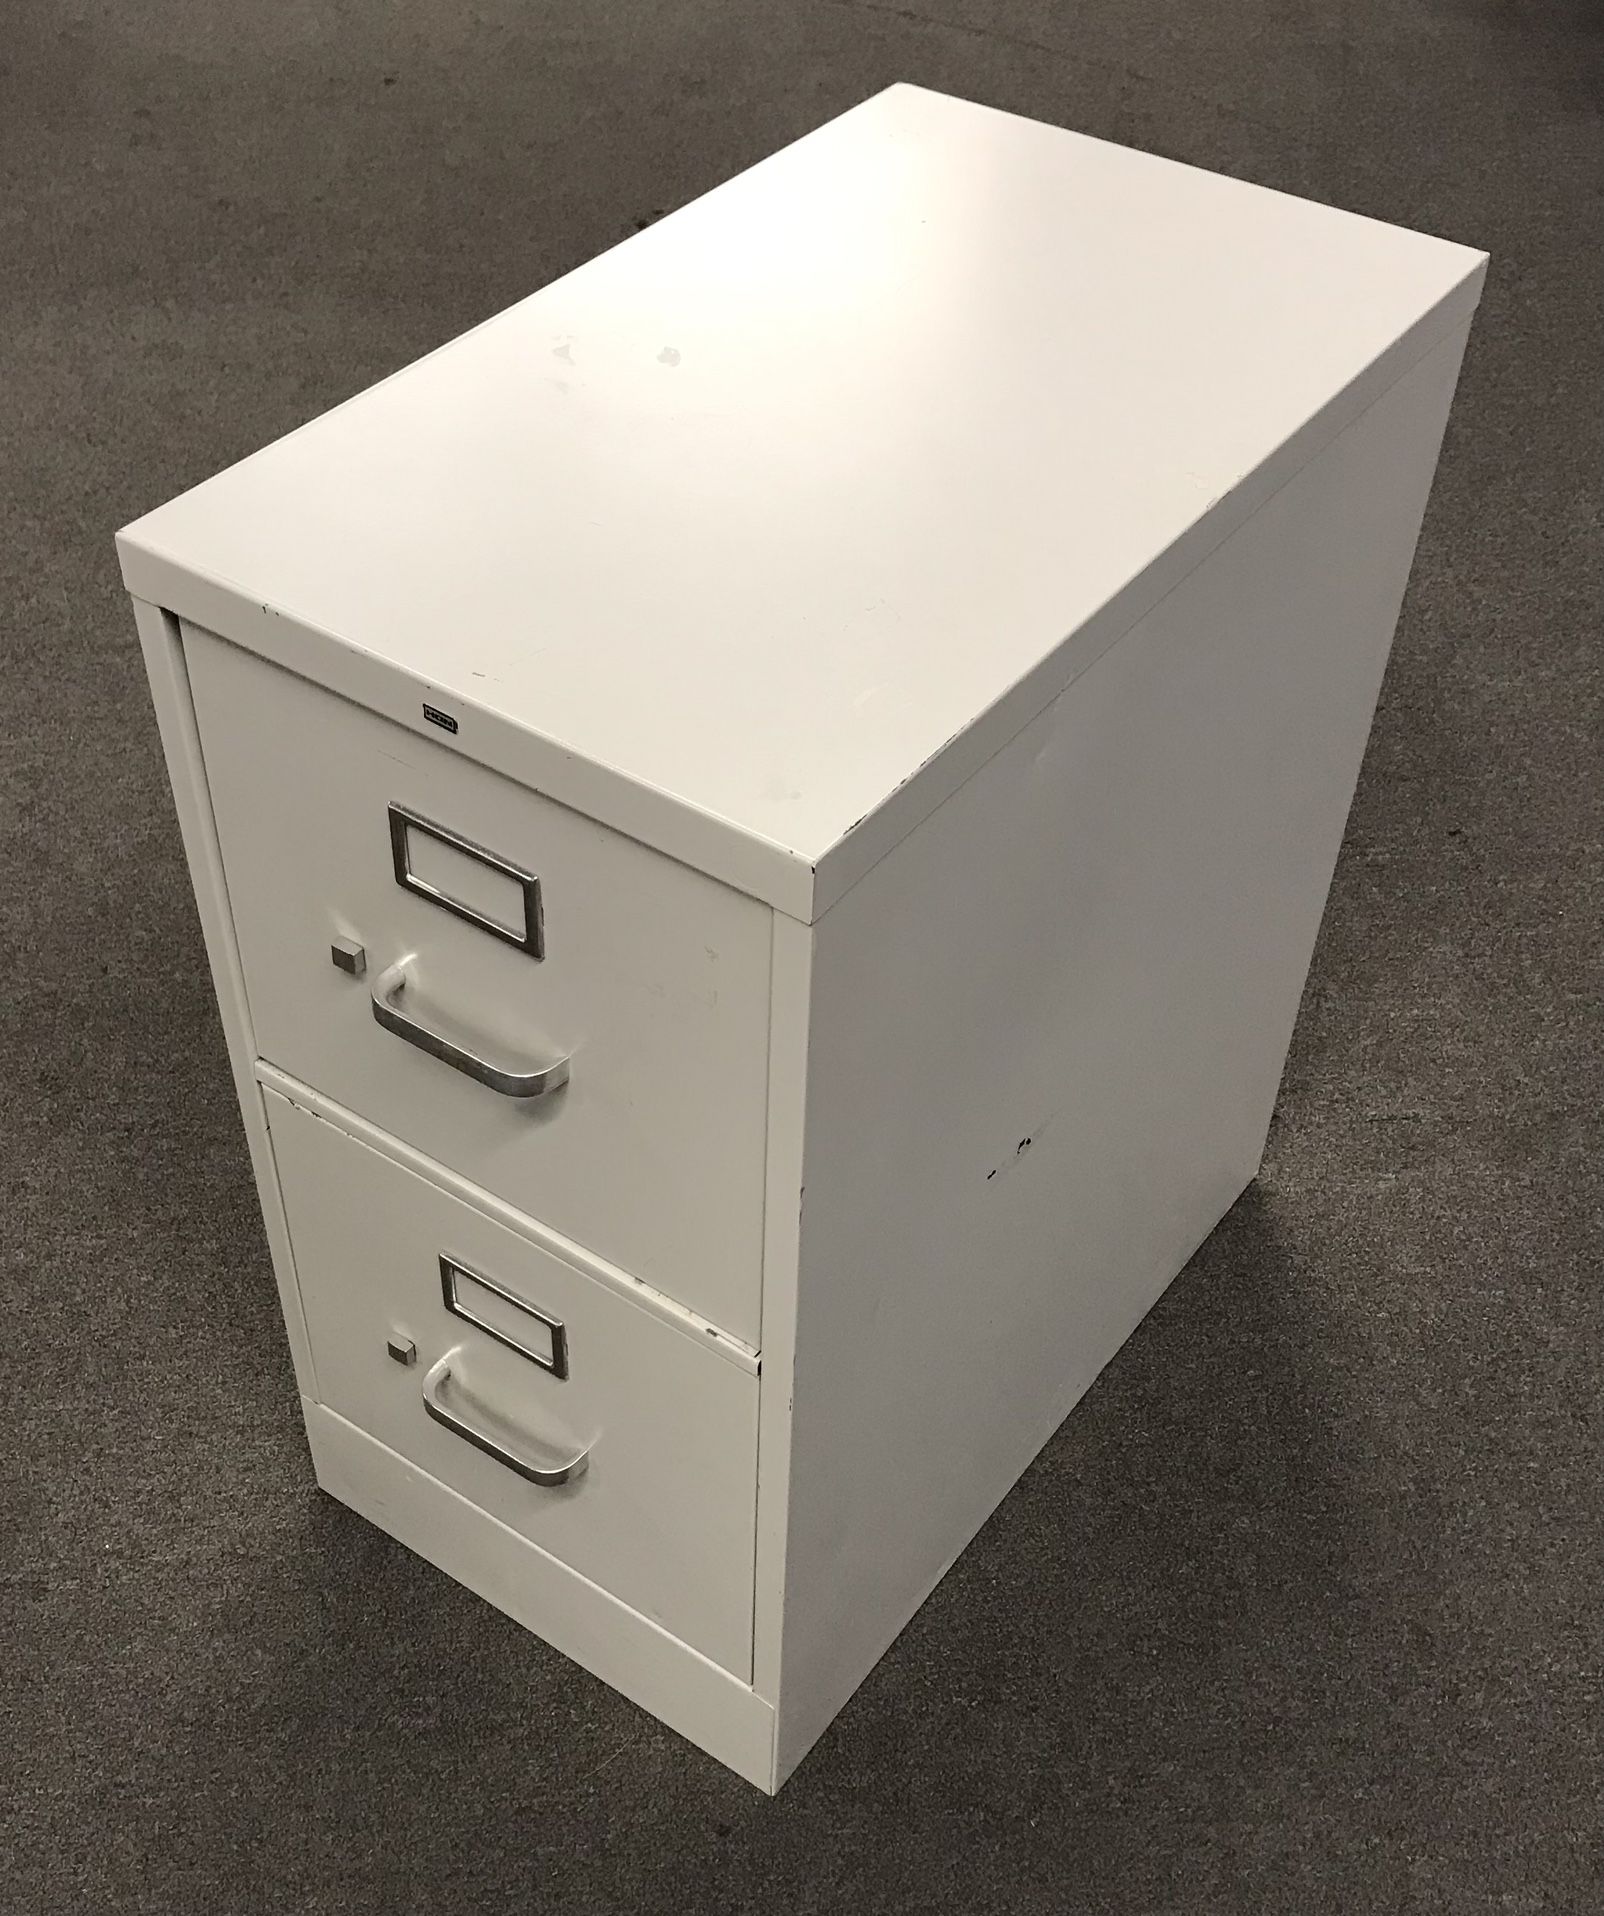 Office Filing Cabinet Up For Sale- Excellent Condition (Tampa)